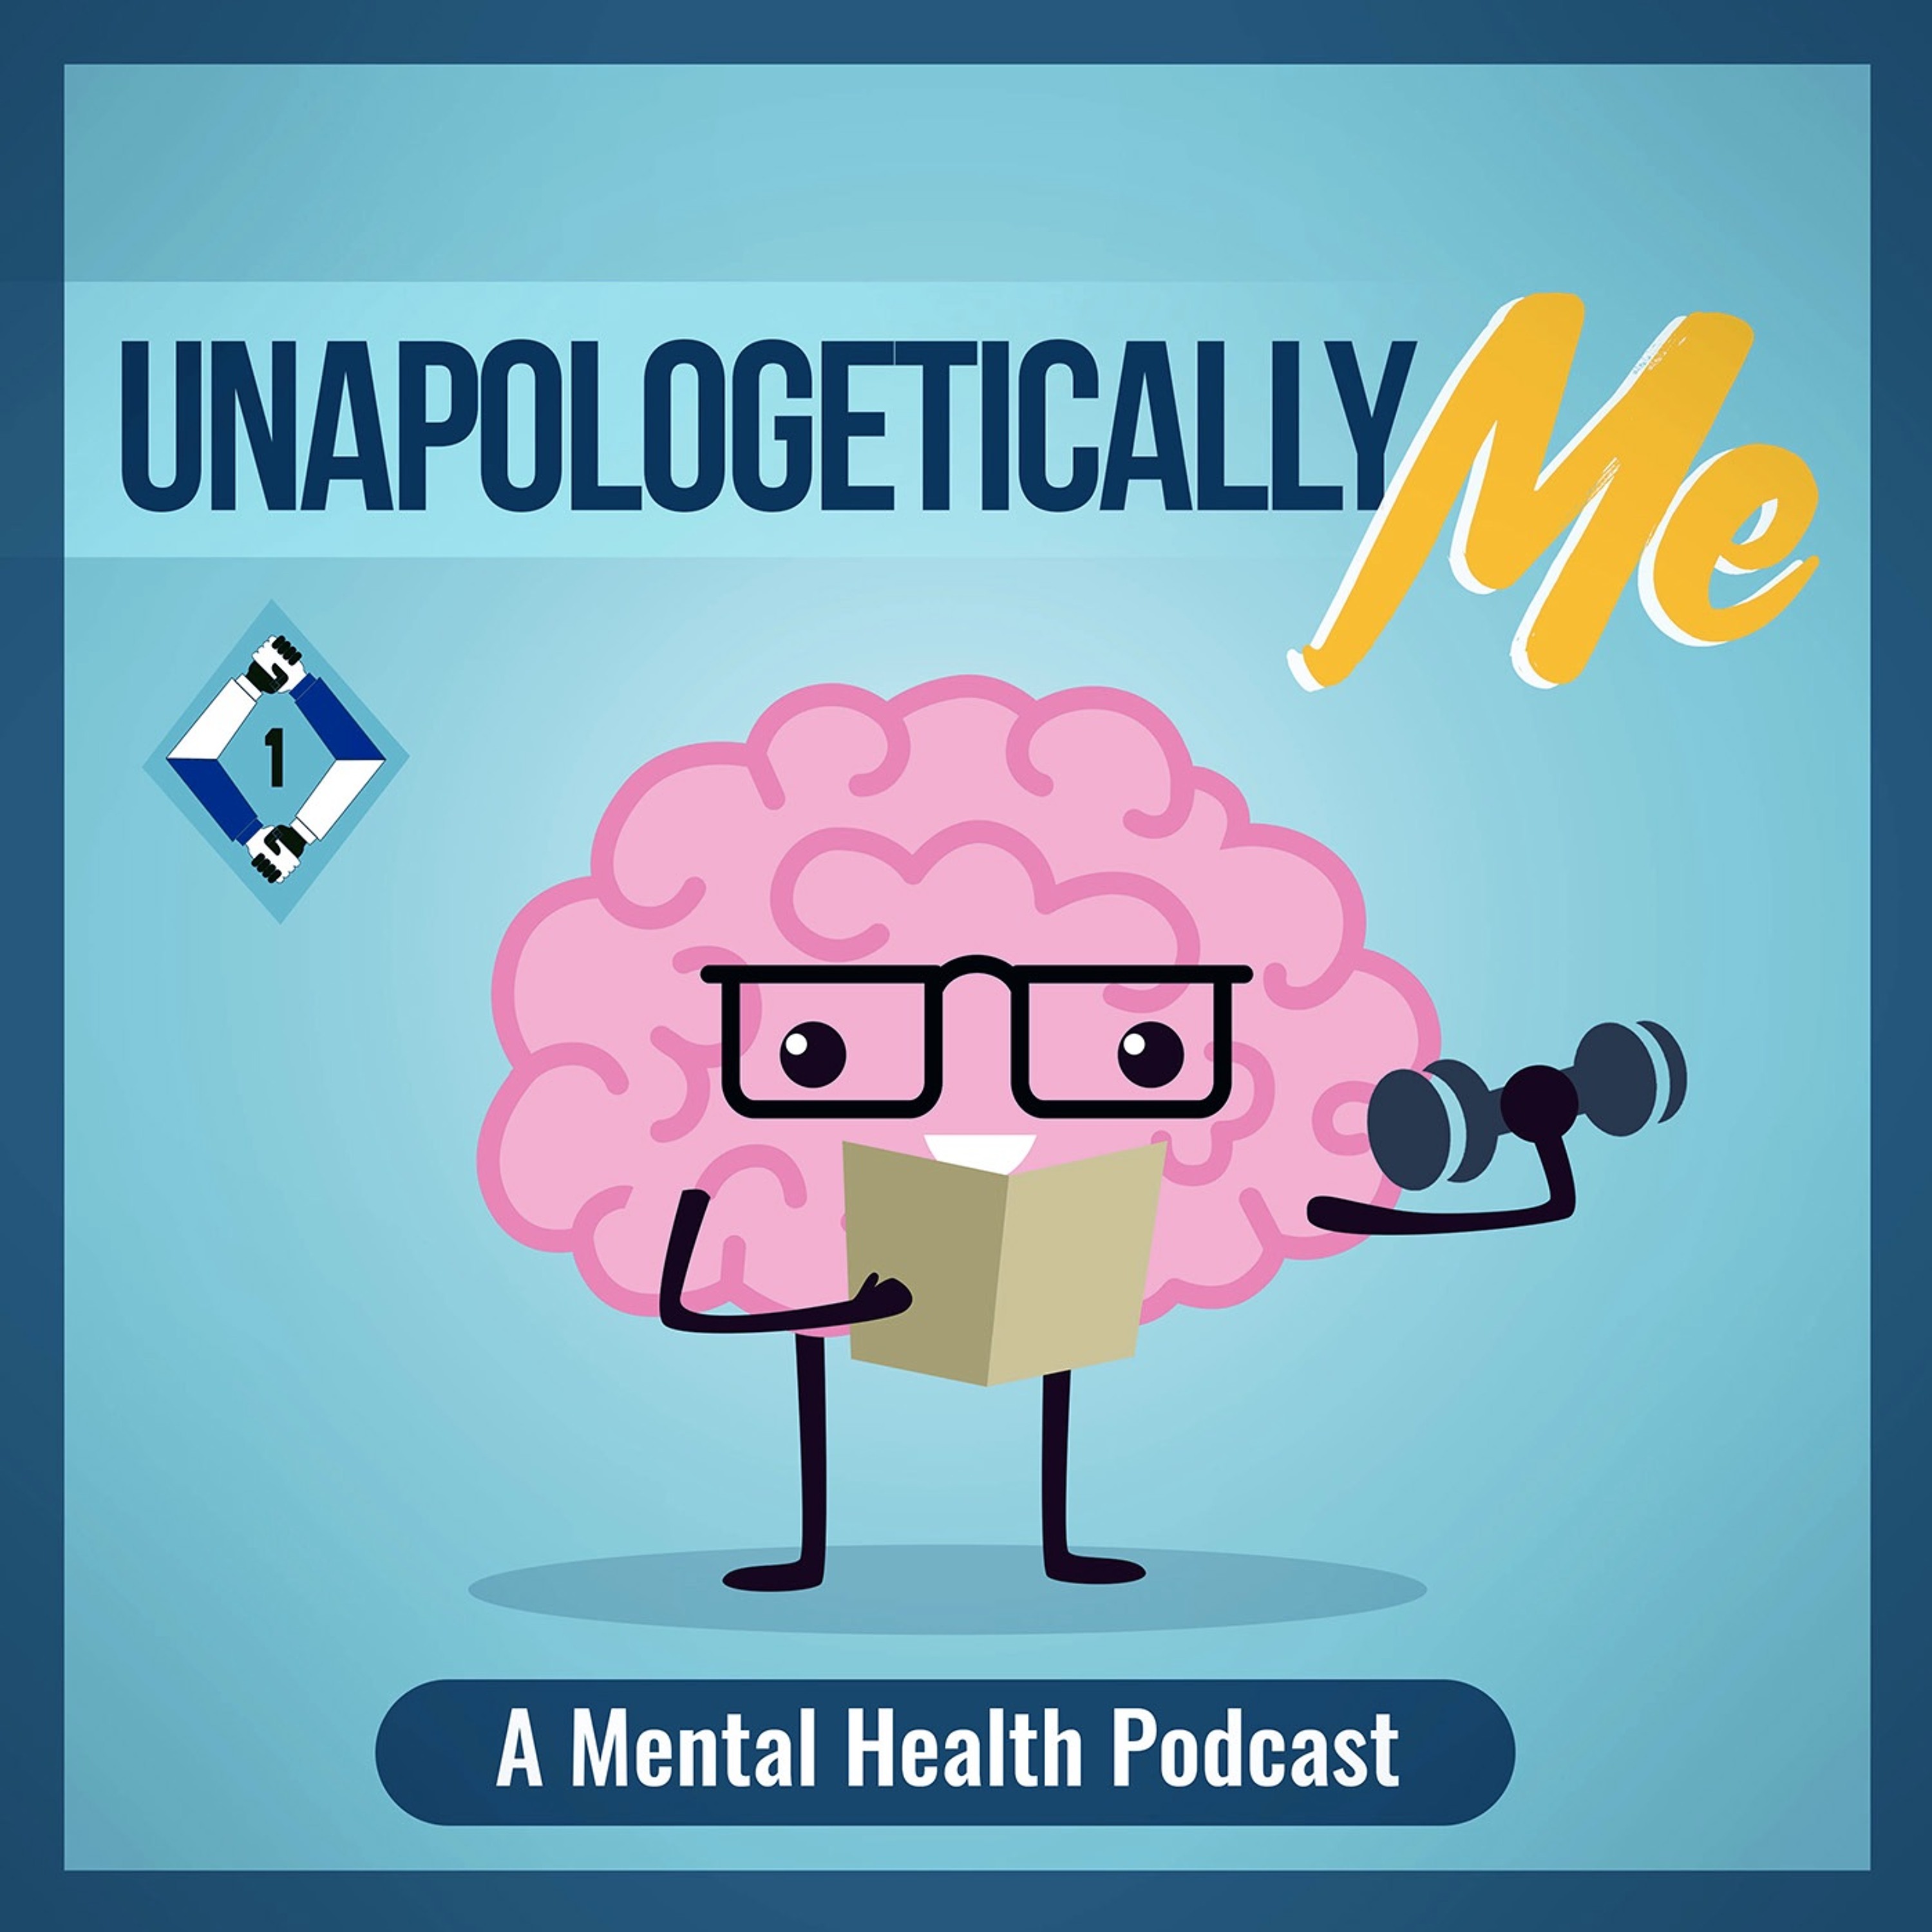 Unapologetically Me: A Mental Health Podcast - Adult Bullying